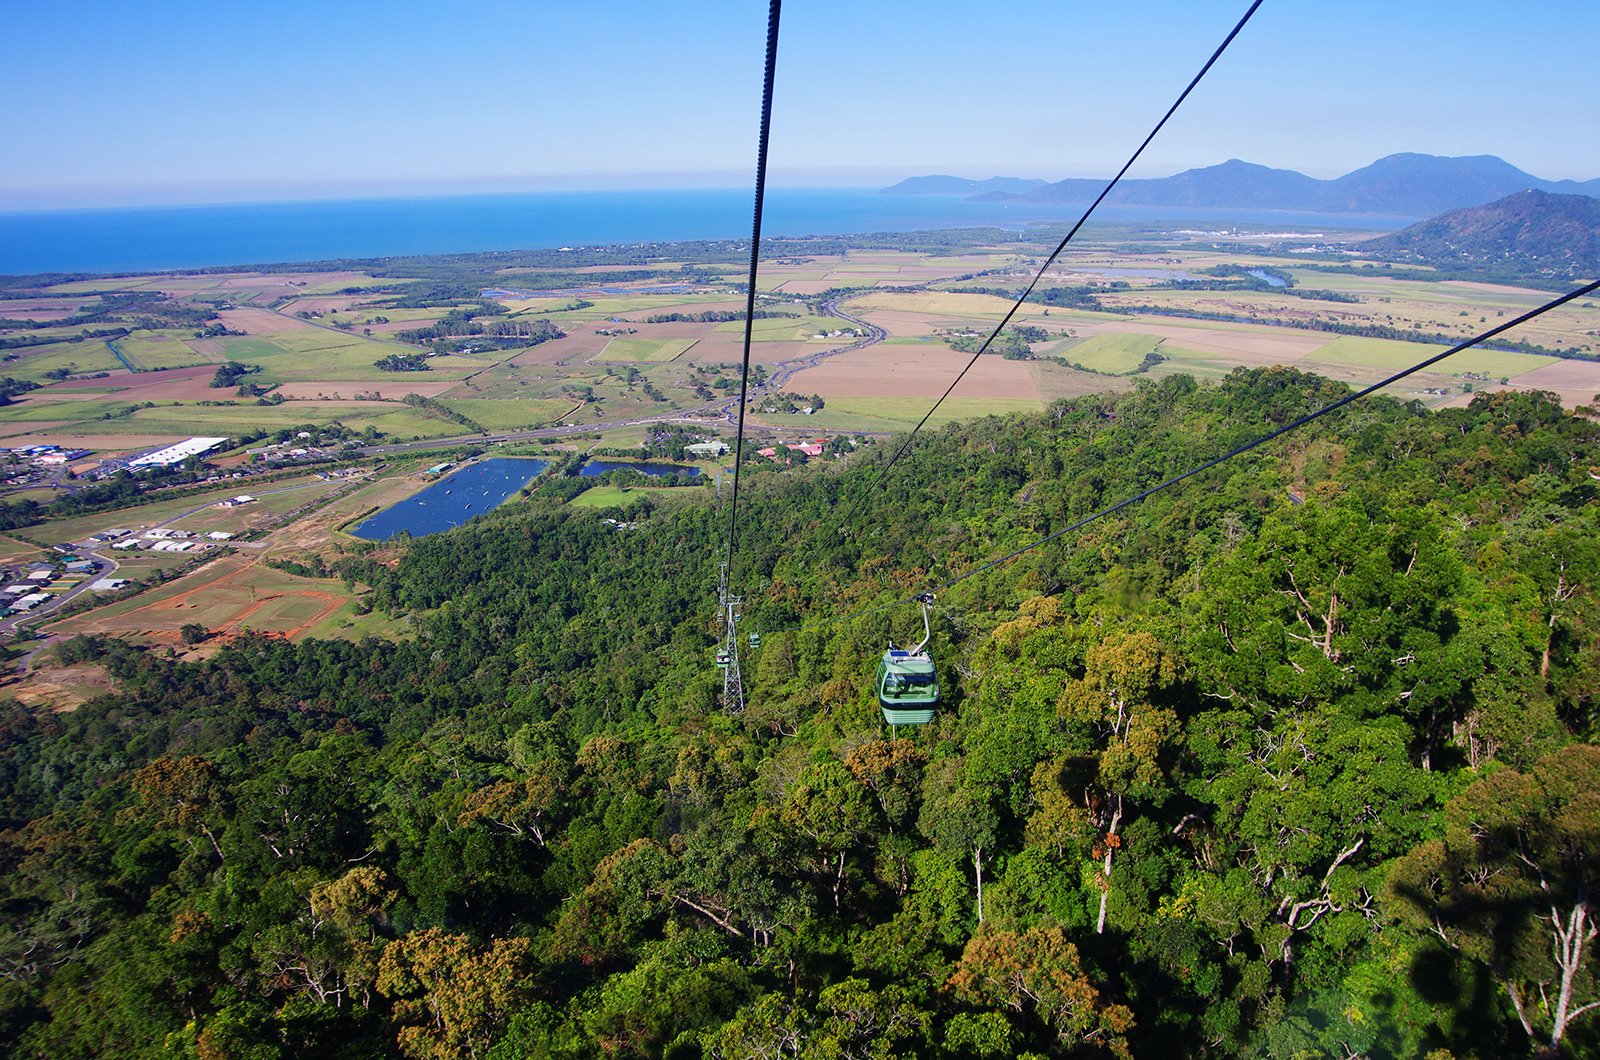 How to take a ride on the cableway over the tropical forest in Cairns